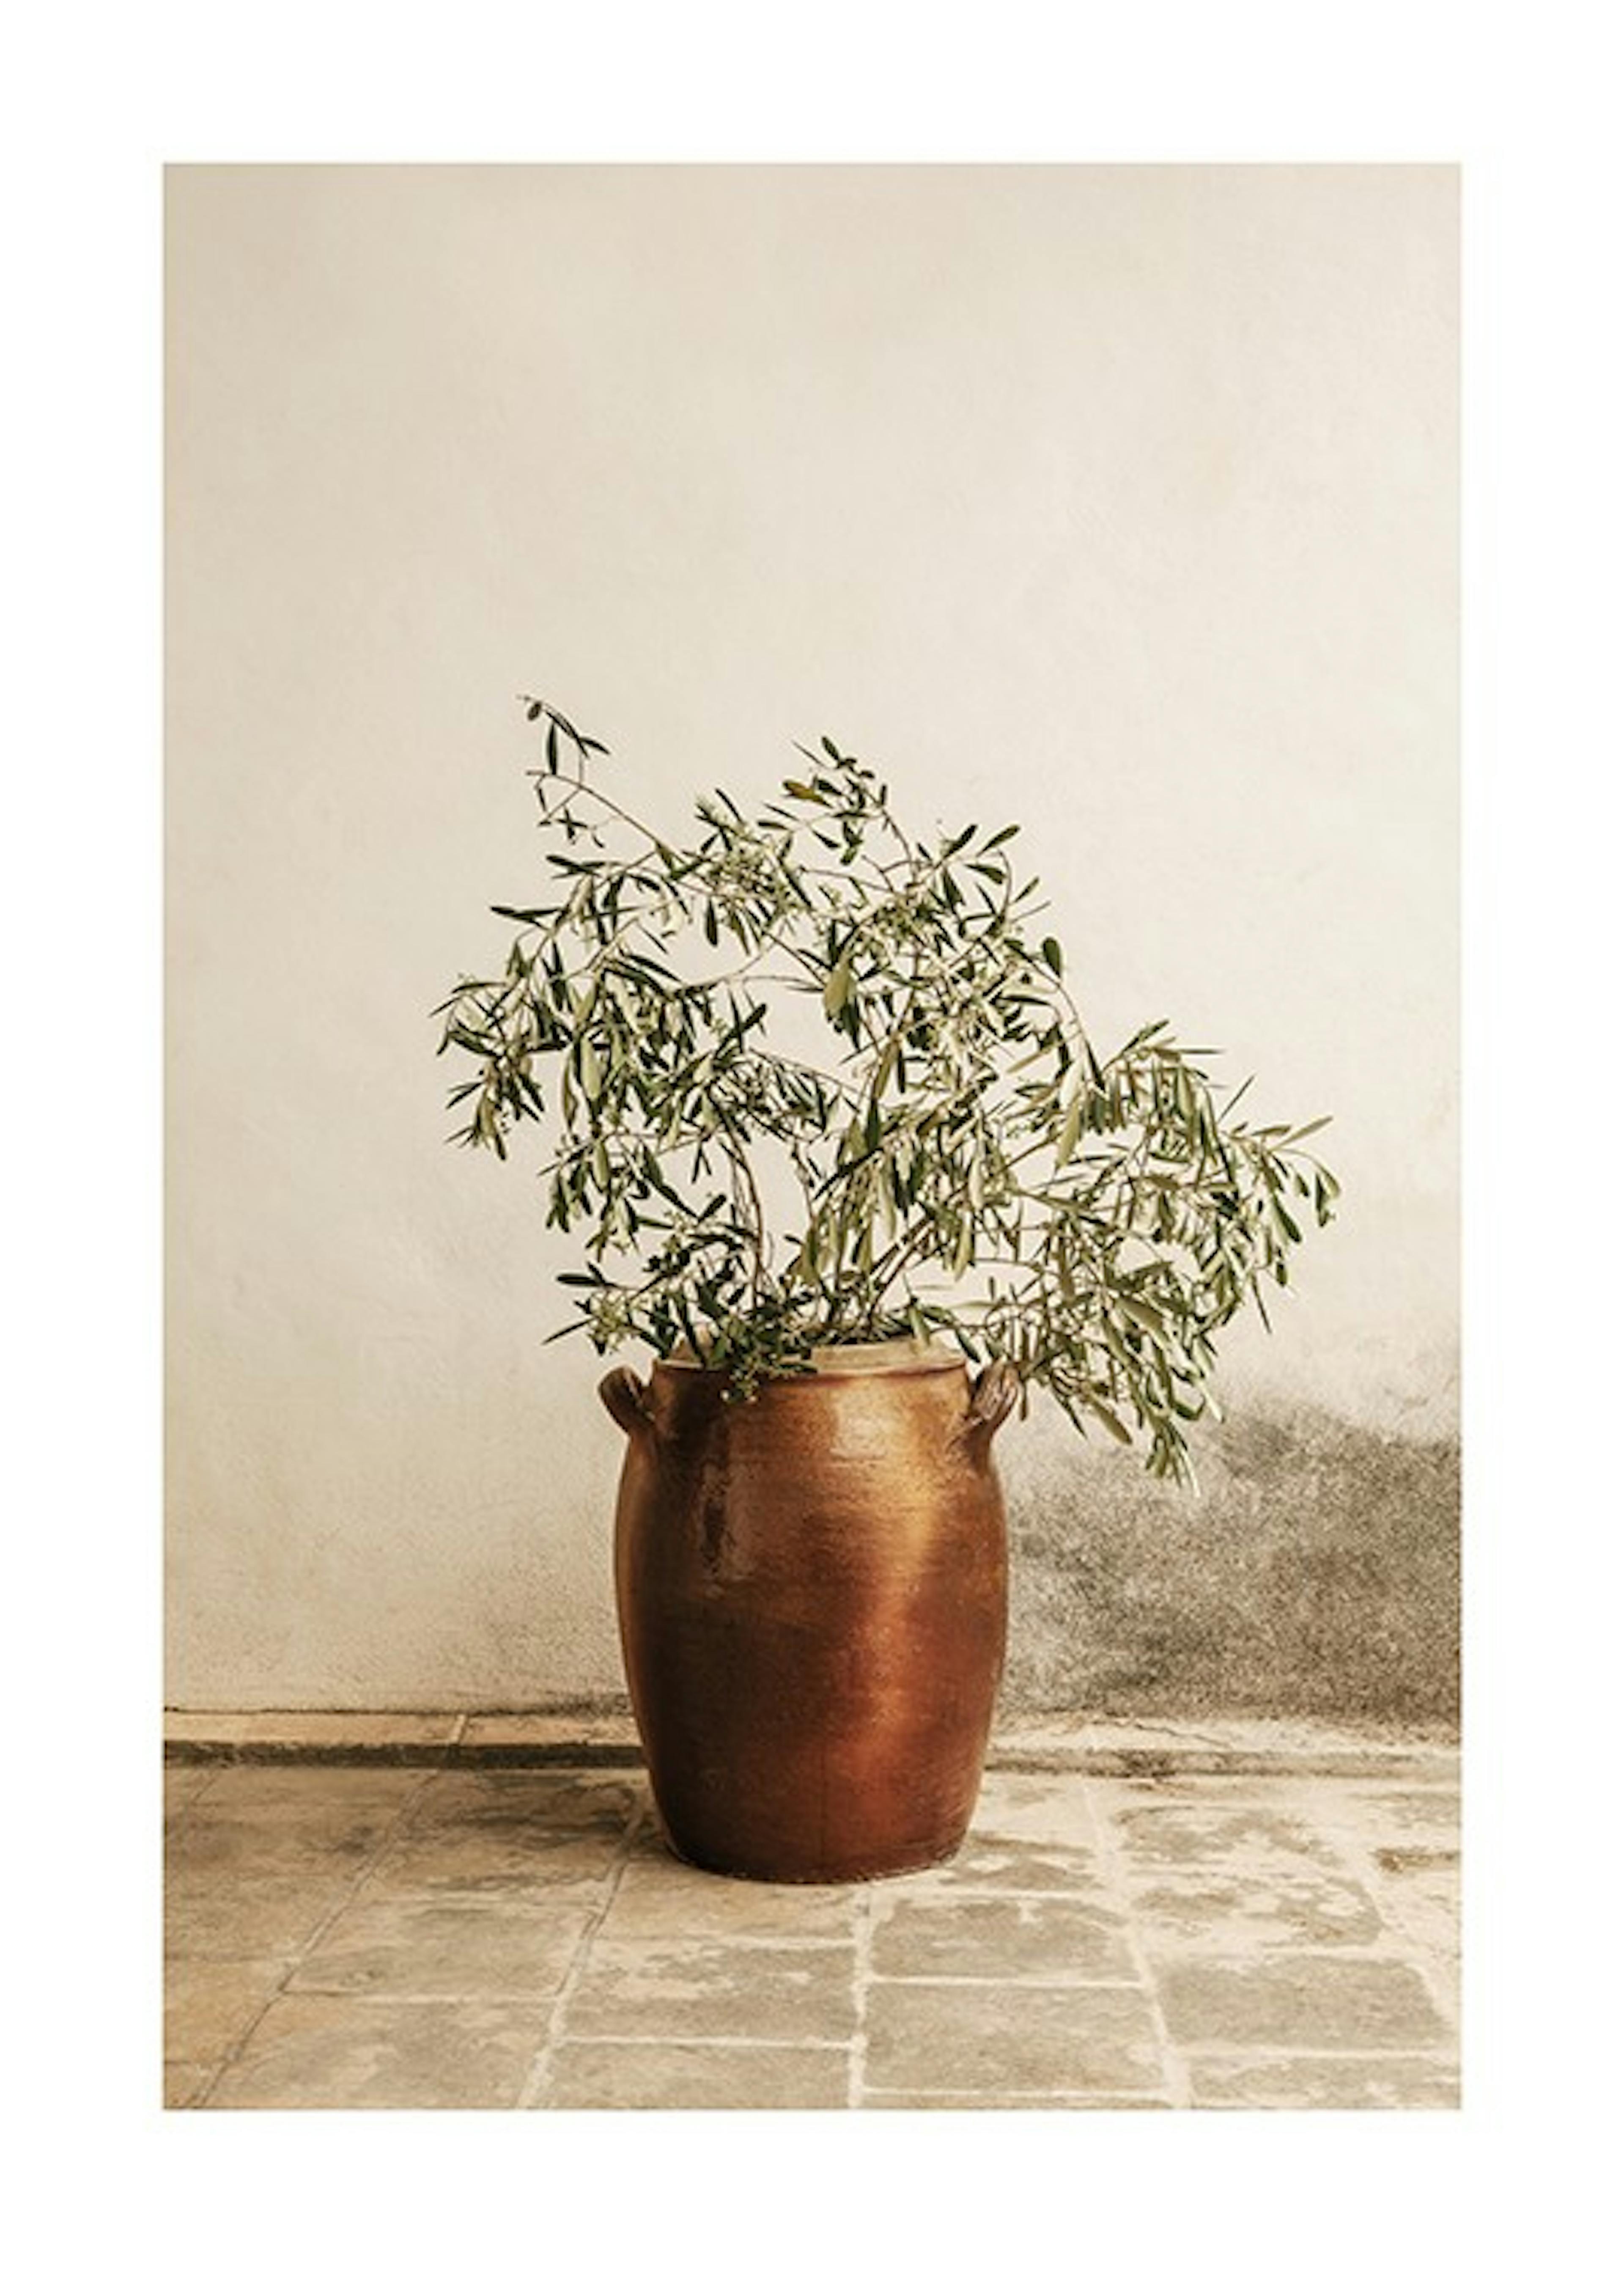 Rustic Olive Branch Print